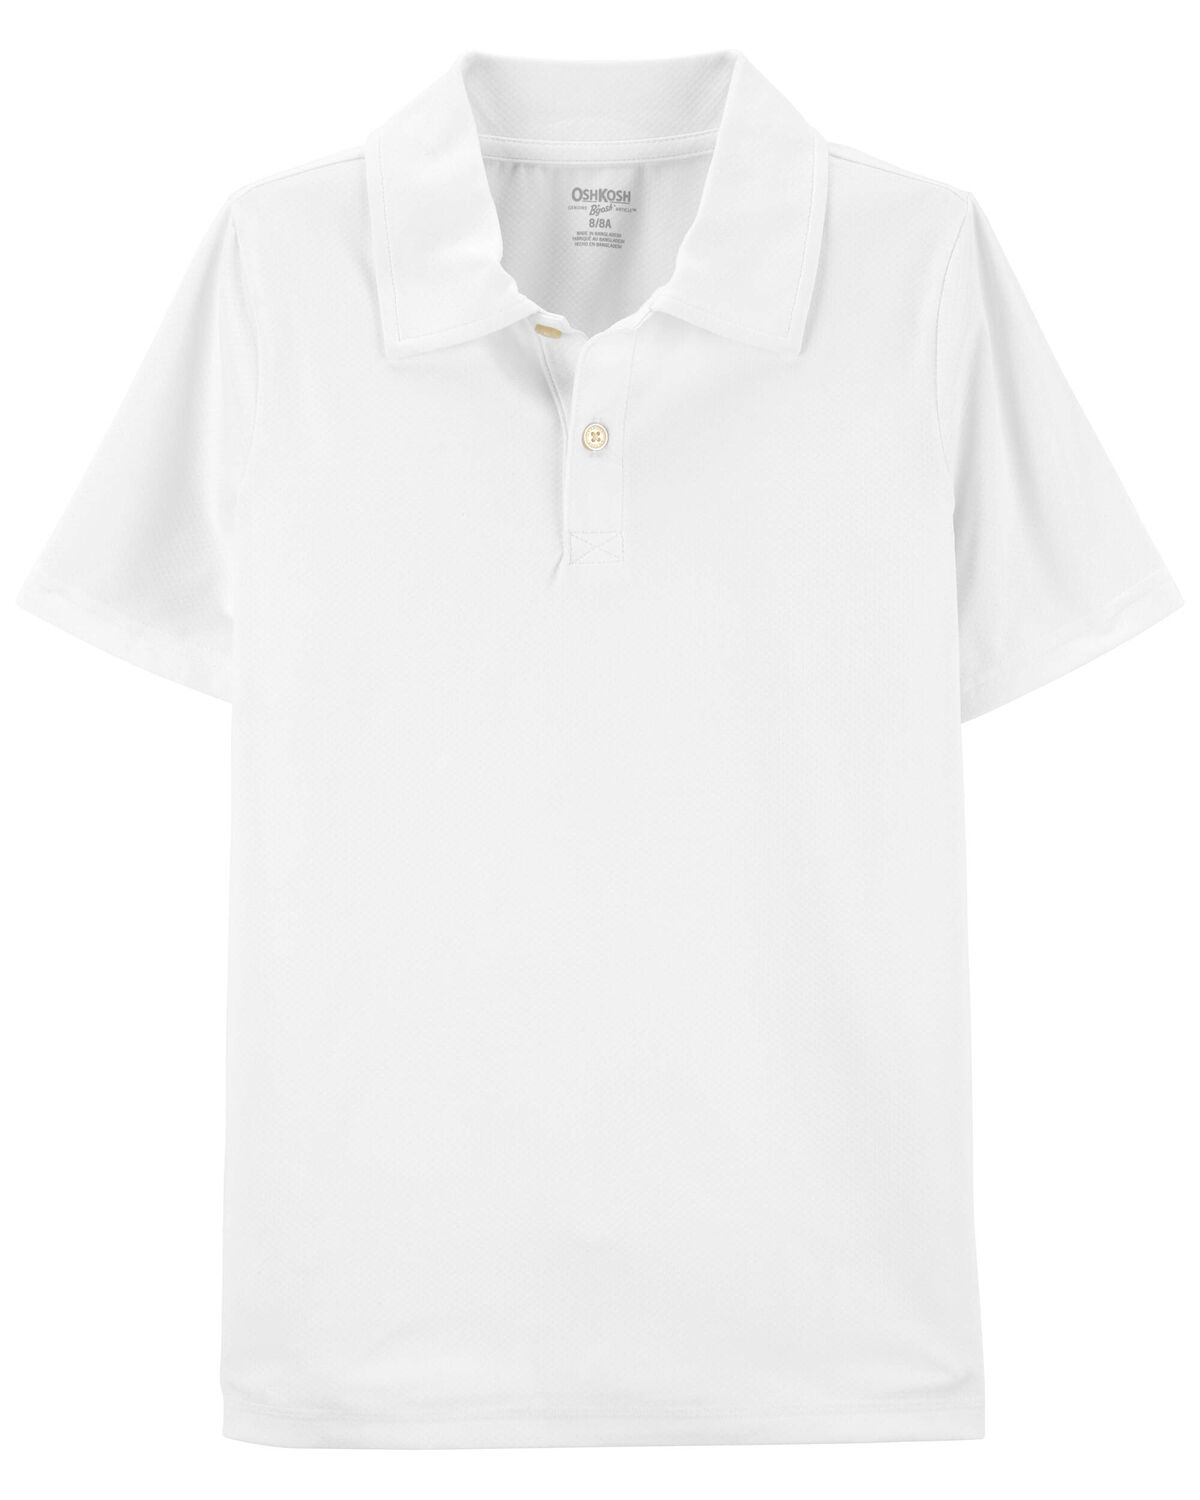 Kid Polo Shirt in Moisture Wicking Active Mesh